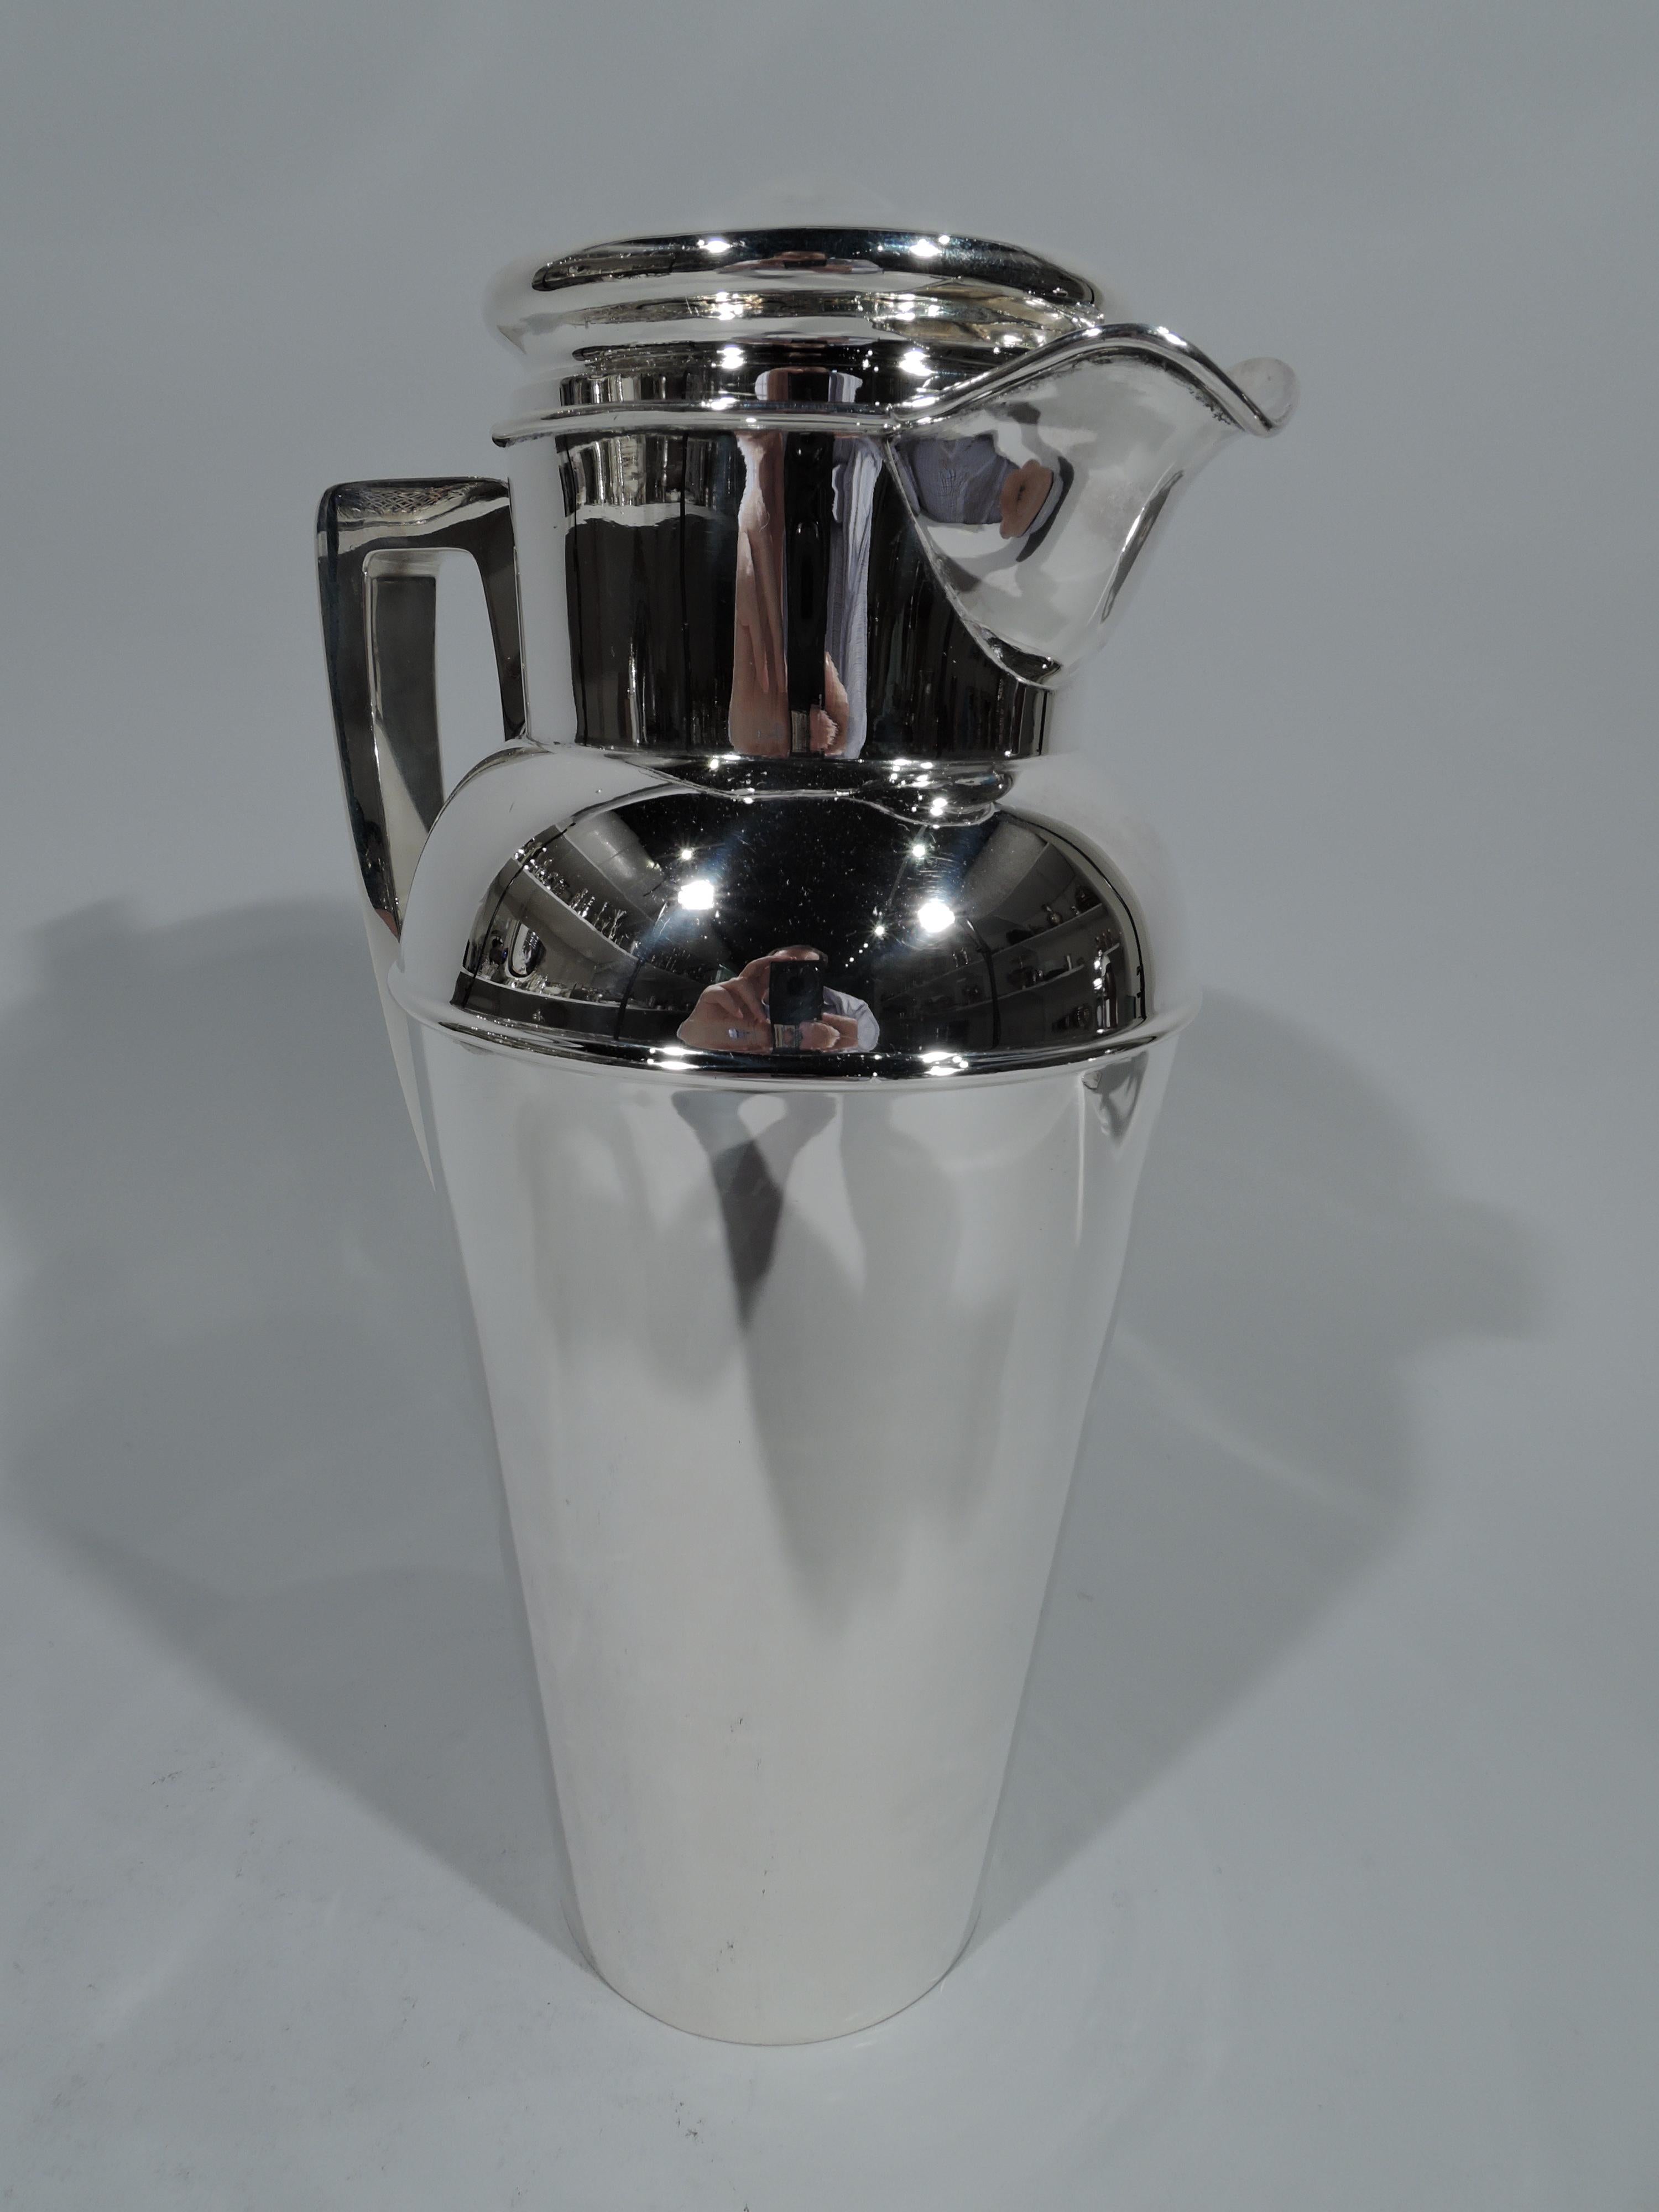 Large Art Deco sterling silver cocktail shaker, circa 1920. Tapering cup, curved shoulder, drum neck, wide lip spout, scroll bracket handle, and raised cover. Neck and cover have built-in strainers. Holds 4 pints. Smart and practical for a